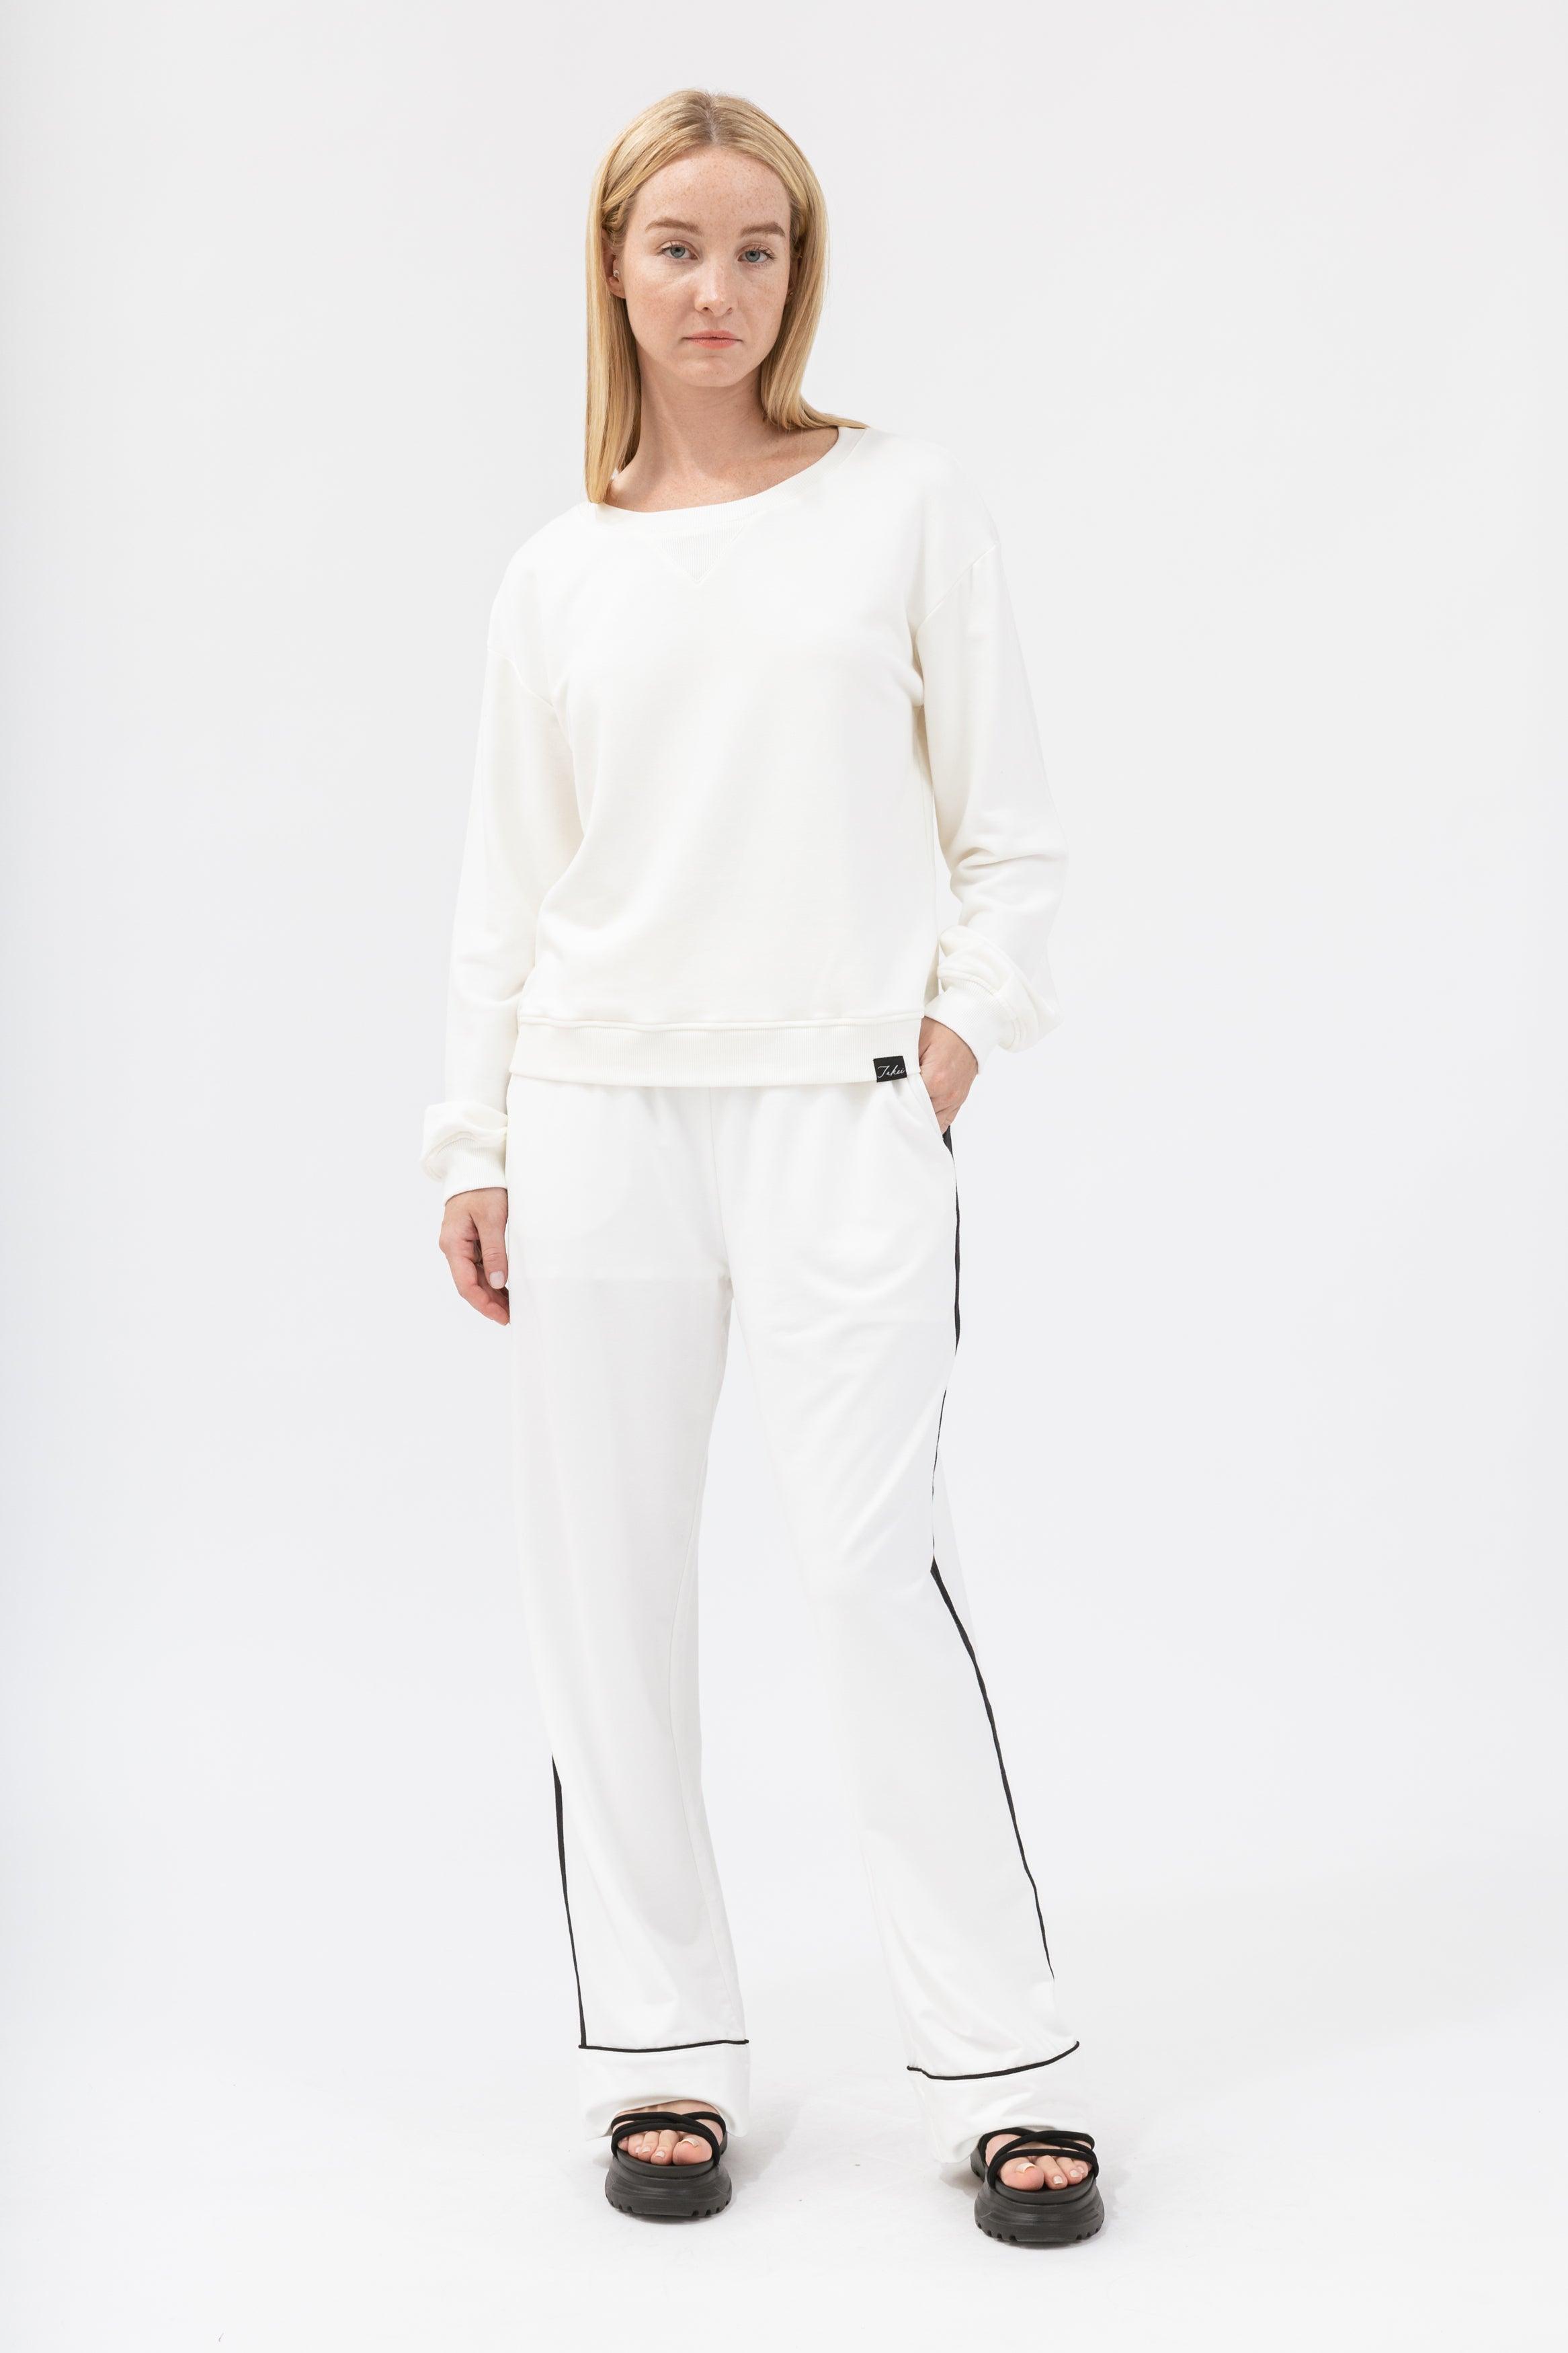 Women&#39;s Side Lined Wide Sweatpant - NOT LABELED